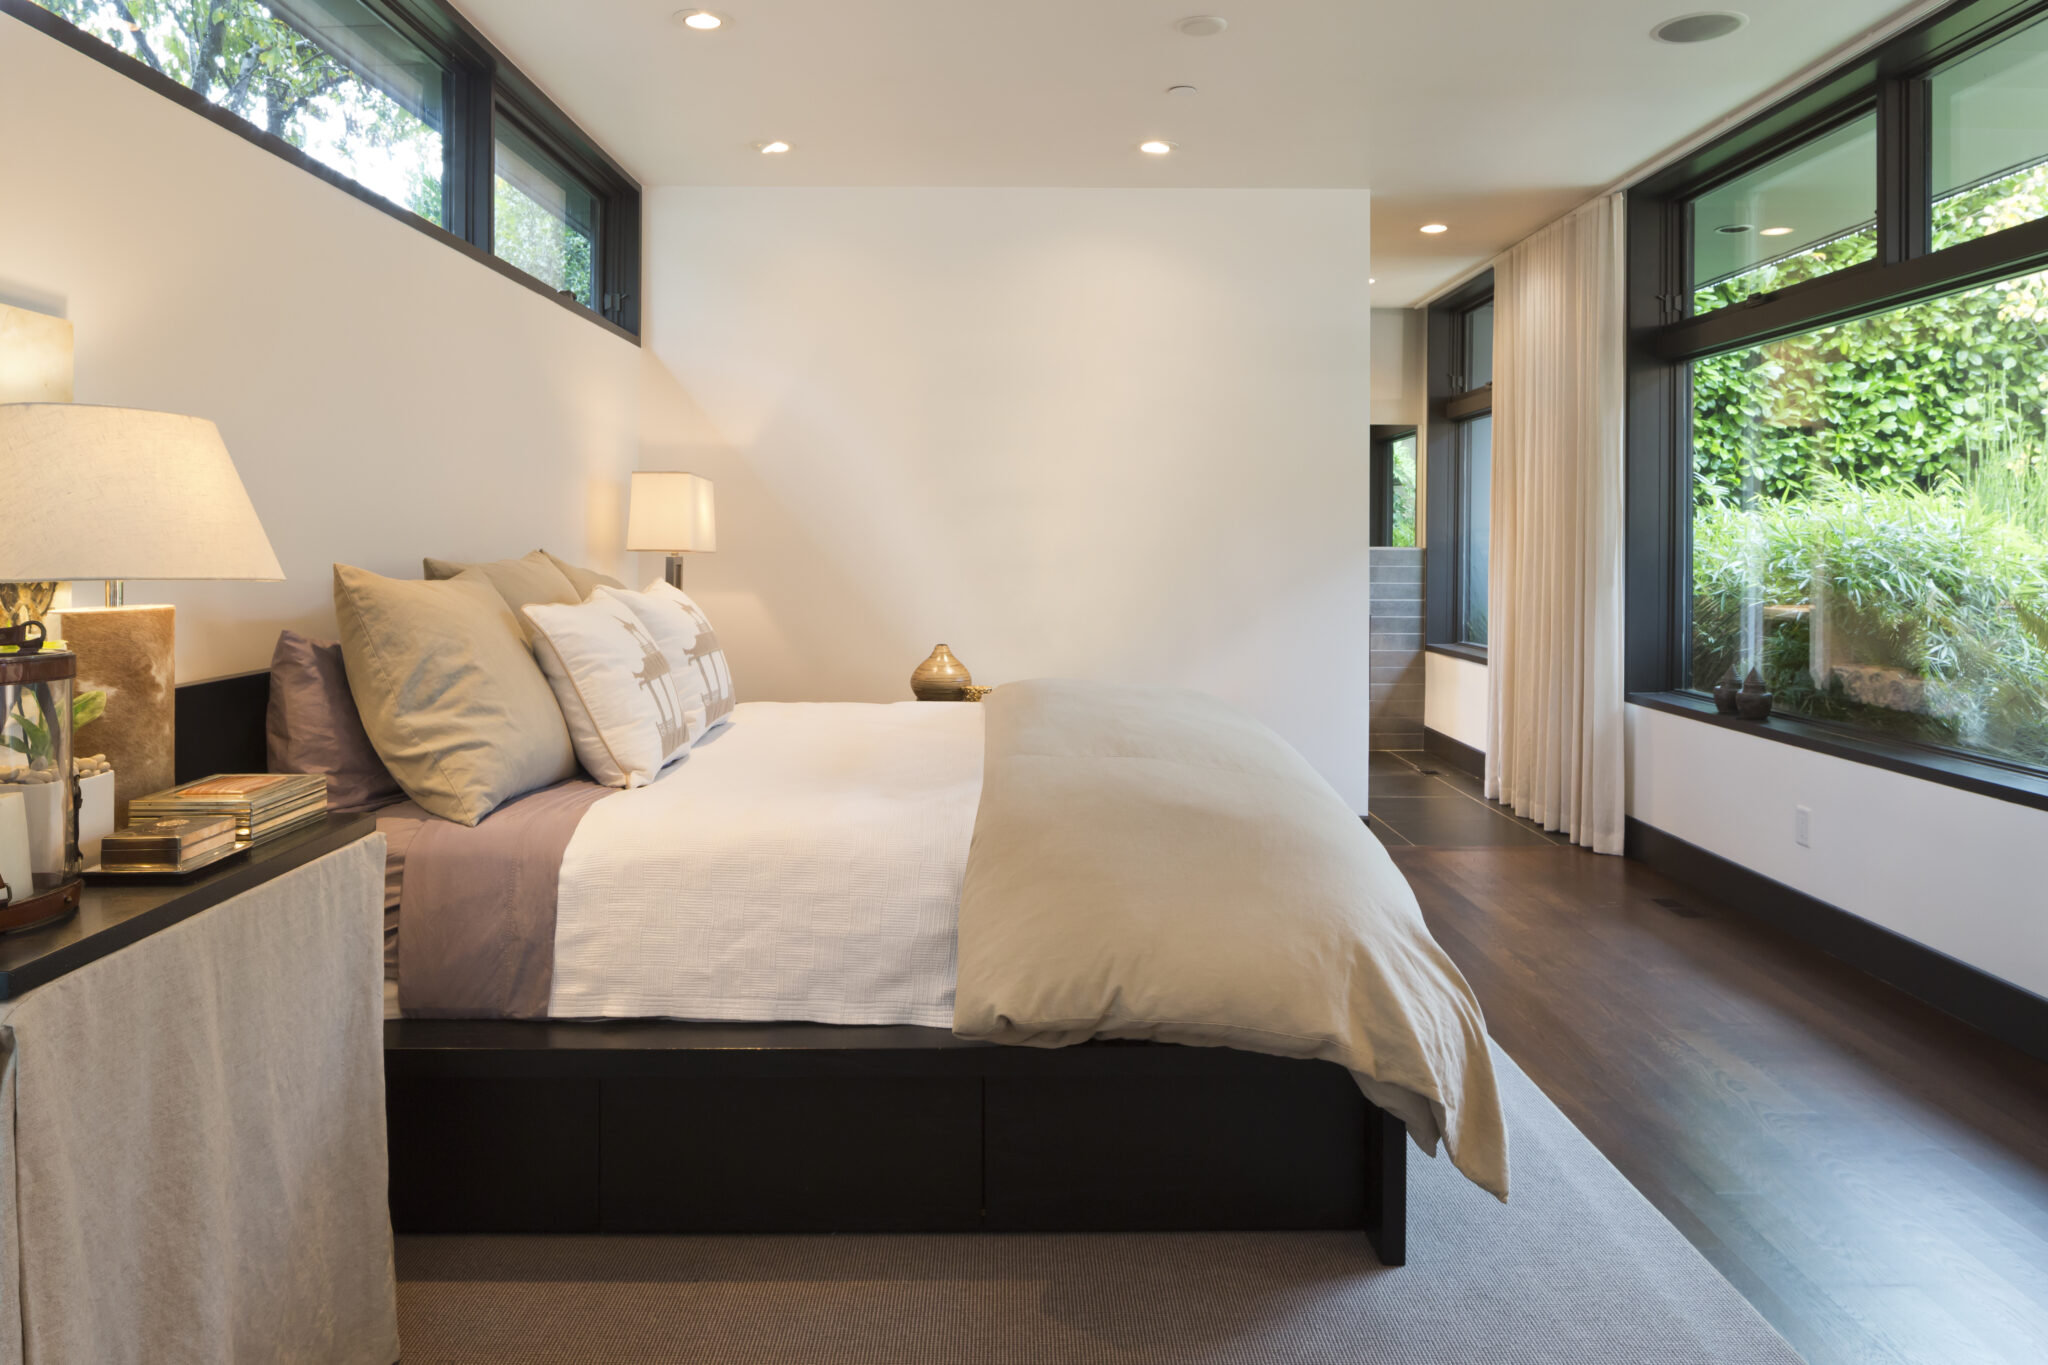 Master Bedroom Ideas for Creating a Comforting, Stylish Escape